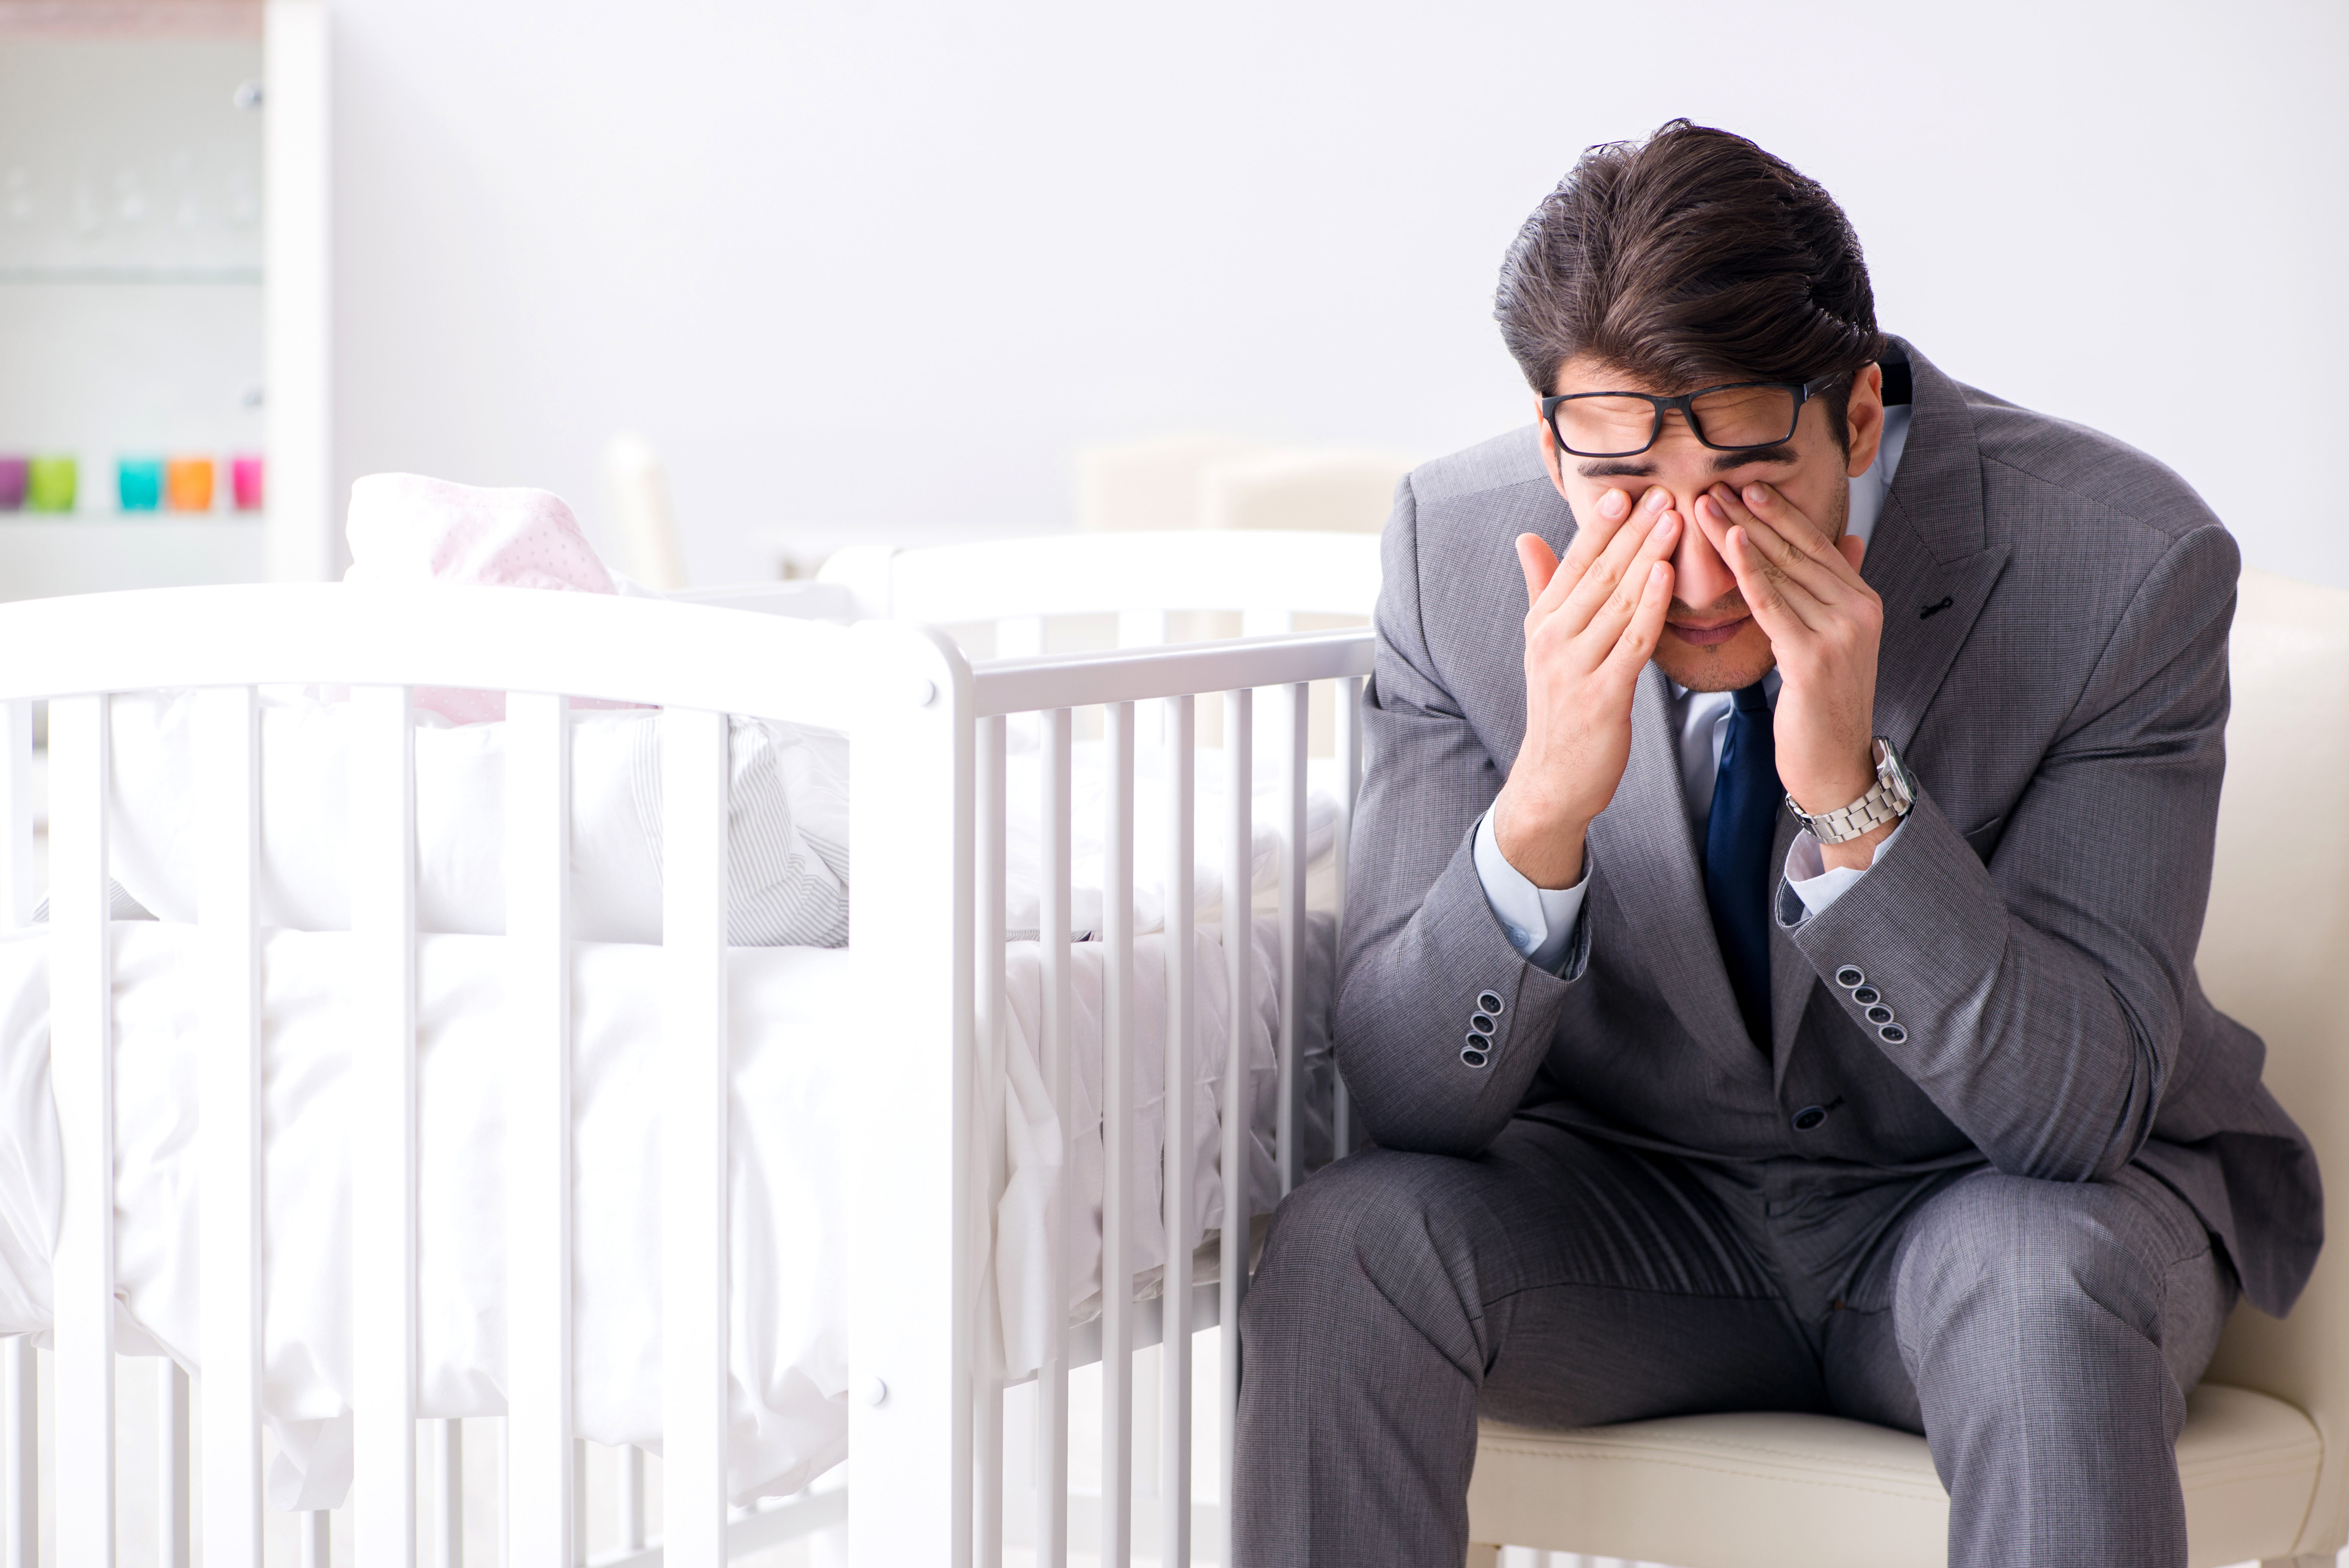 A father looking stressed  | Source: Shutterstock